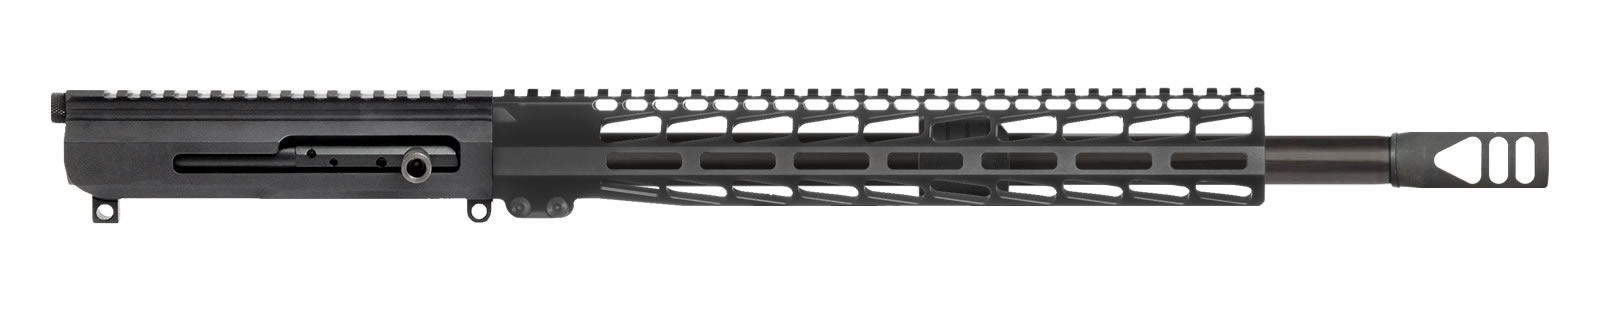 160-803-ar-15-upper-assembly-beowulf-50-cal-mlok-muzzle-brake-side-charge.